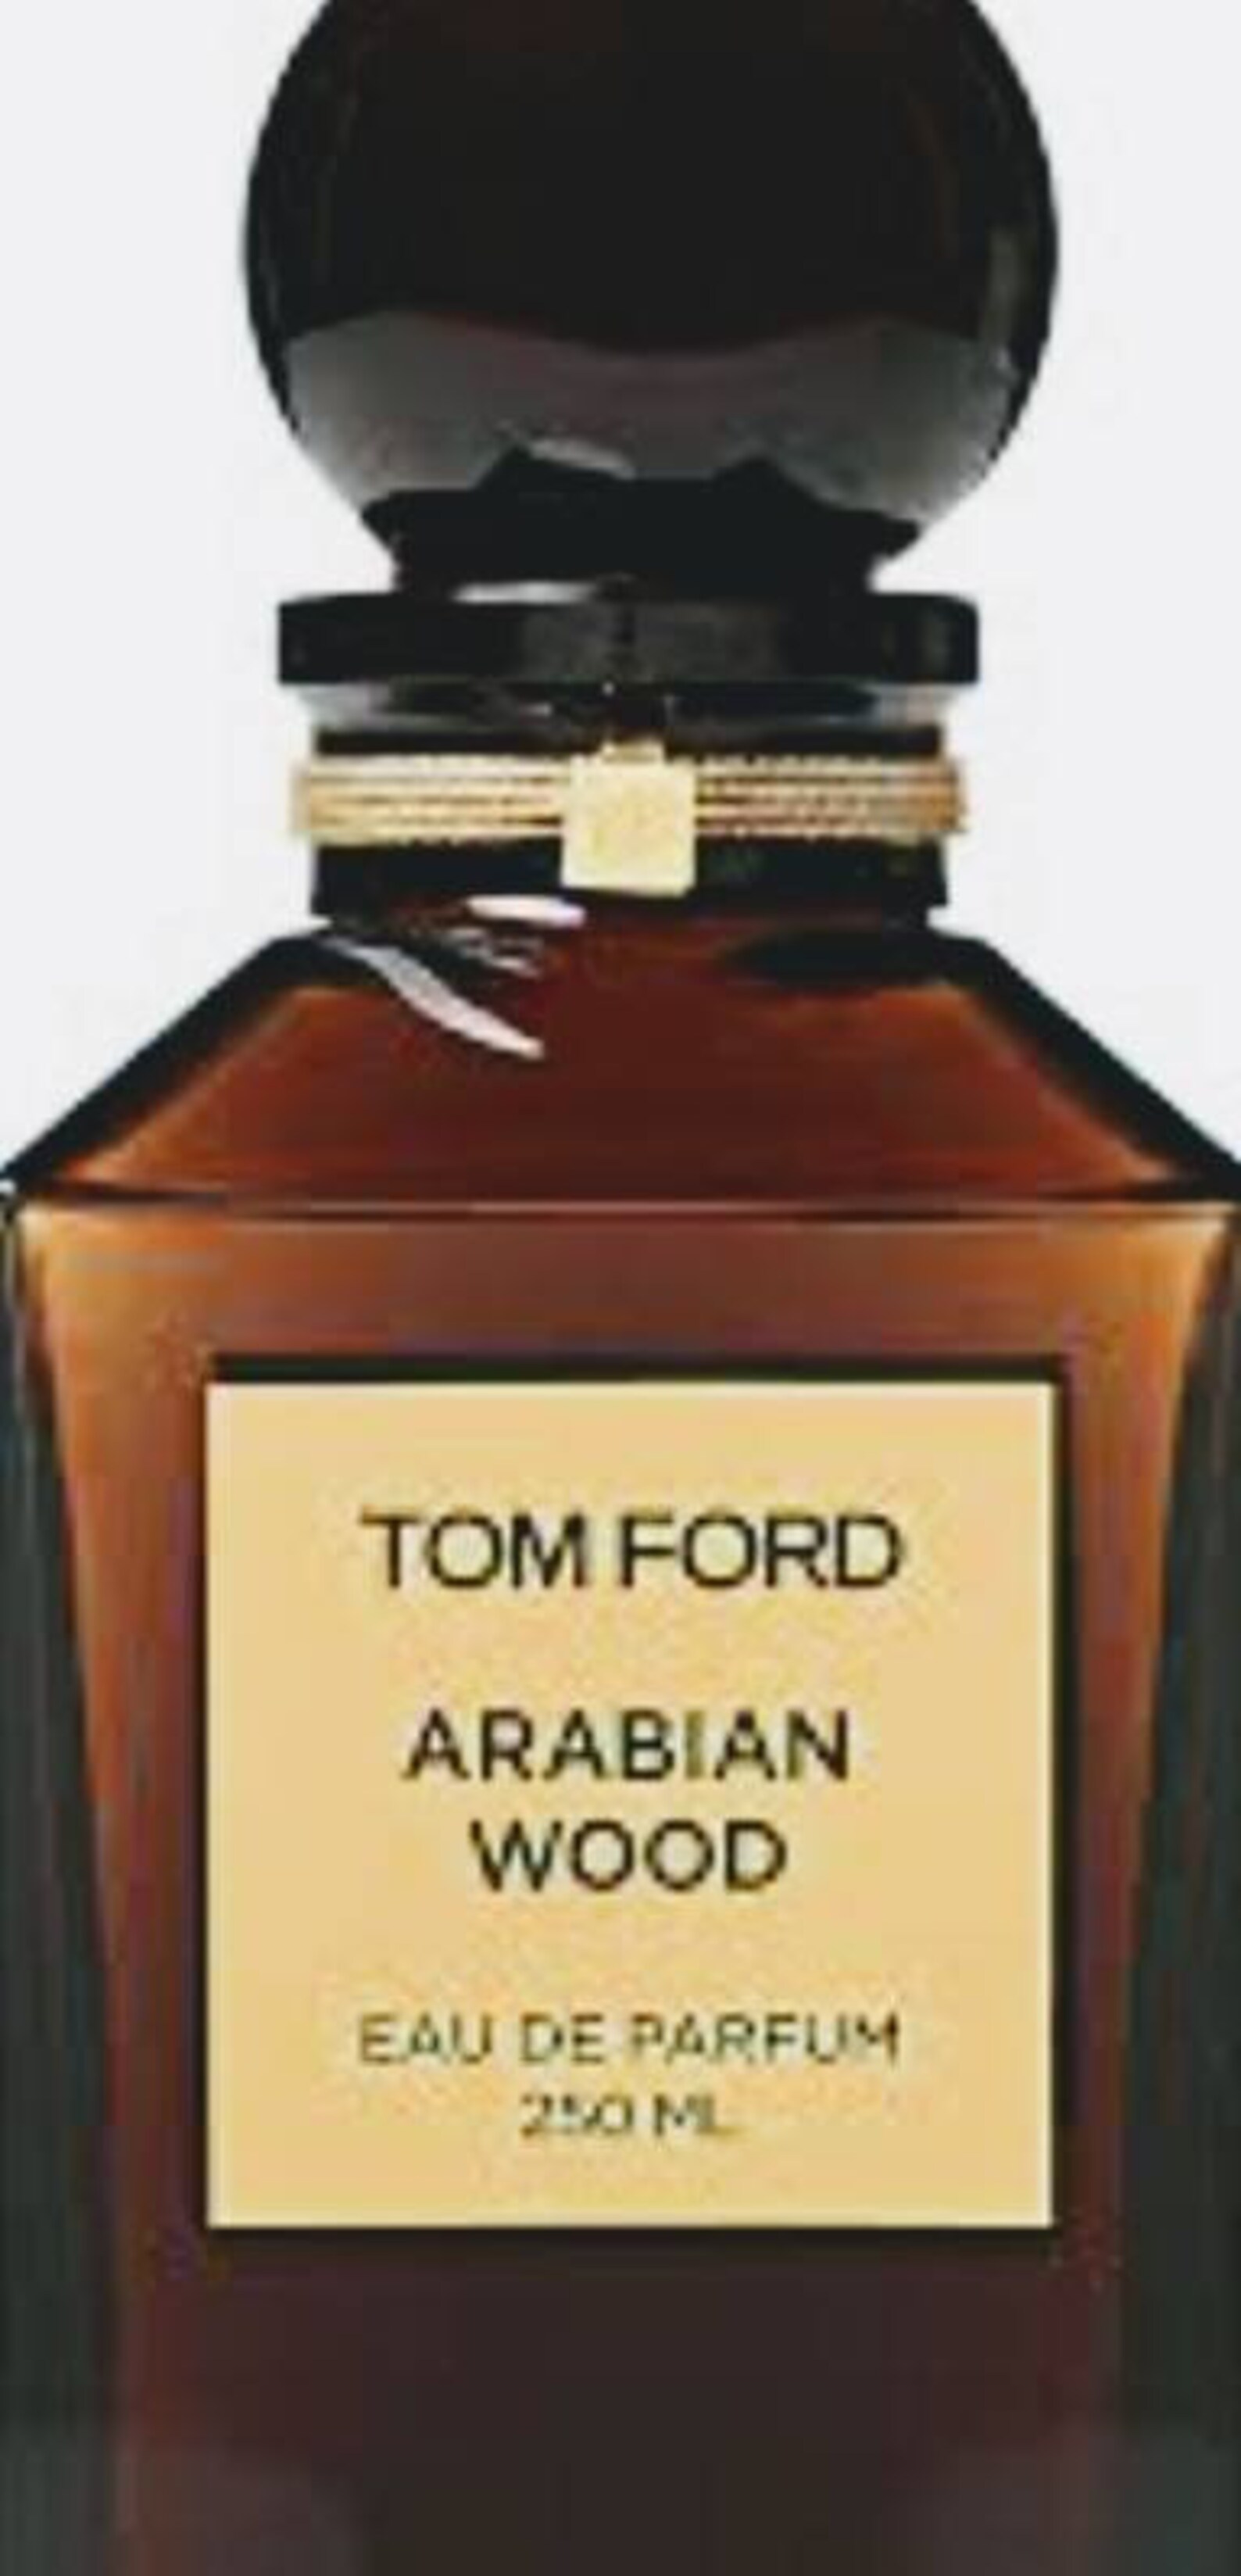 Tom Ford Arabian wood type inspired by Tom Ford 3 oz soybased | Etsy